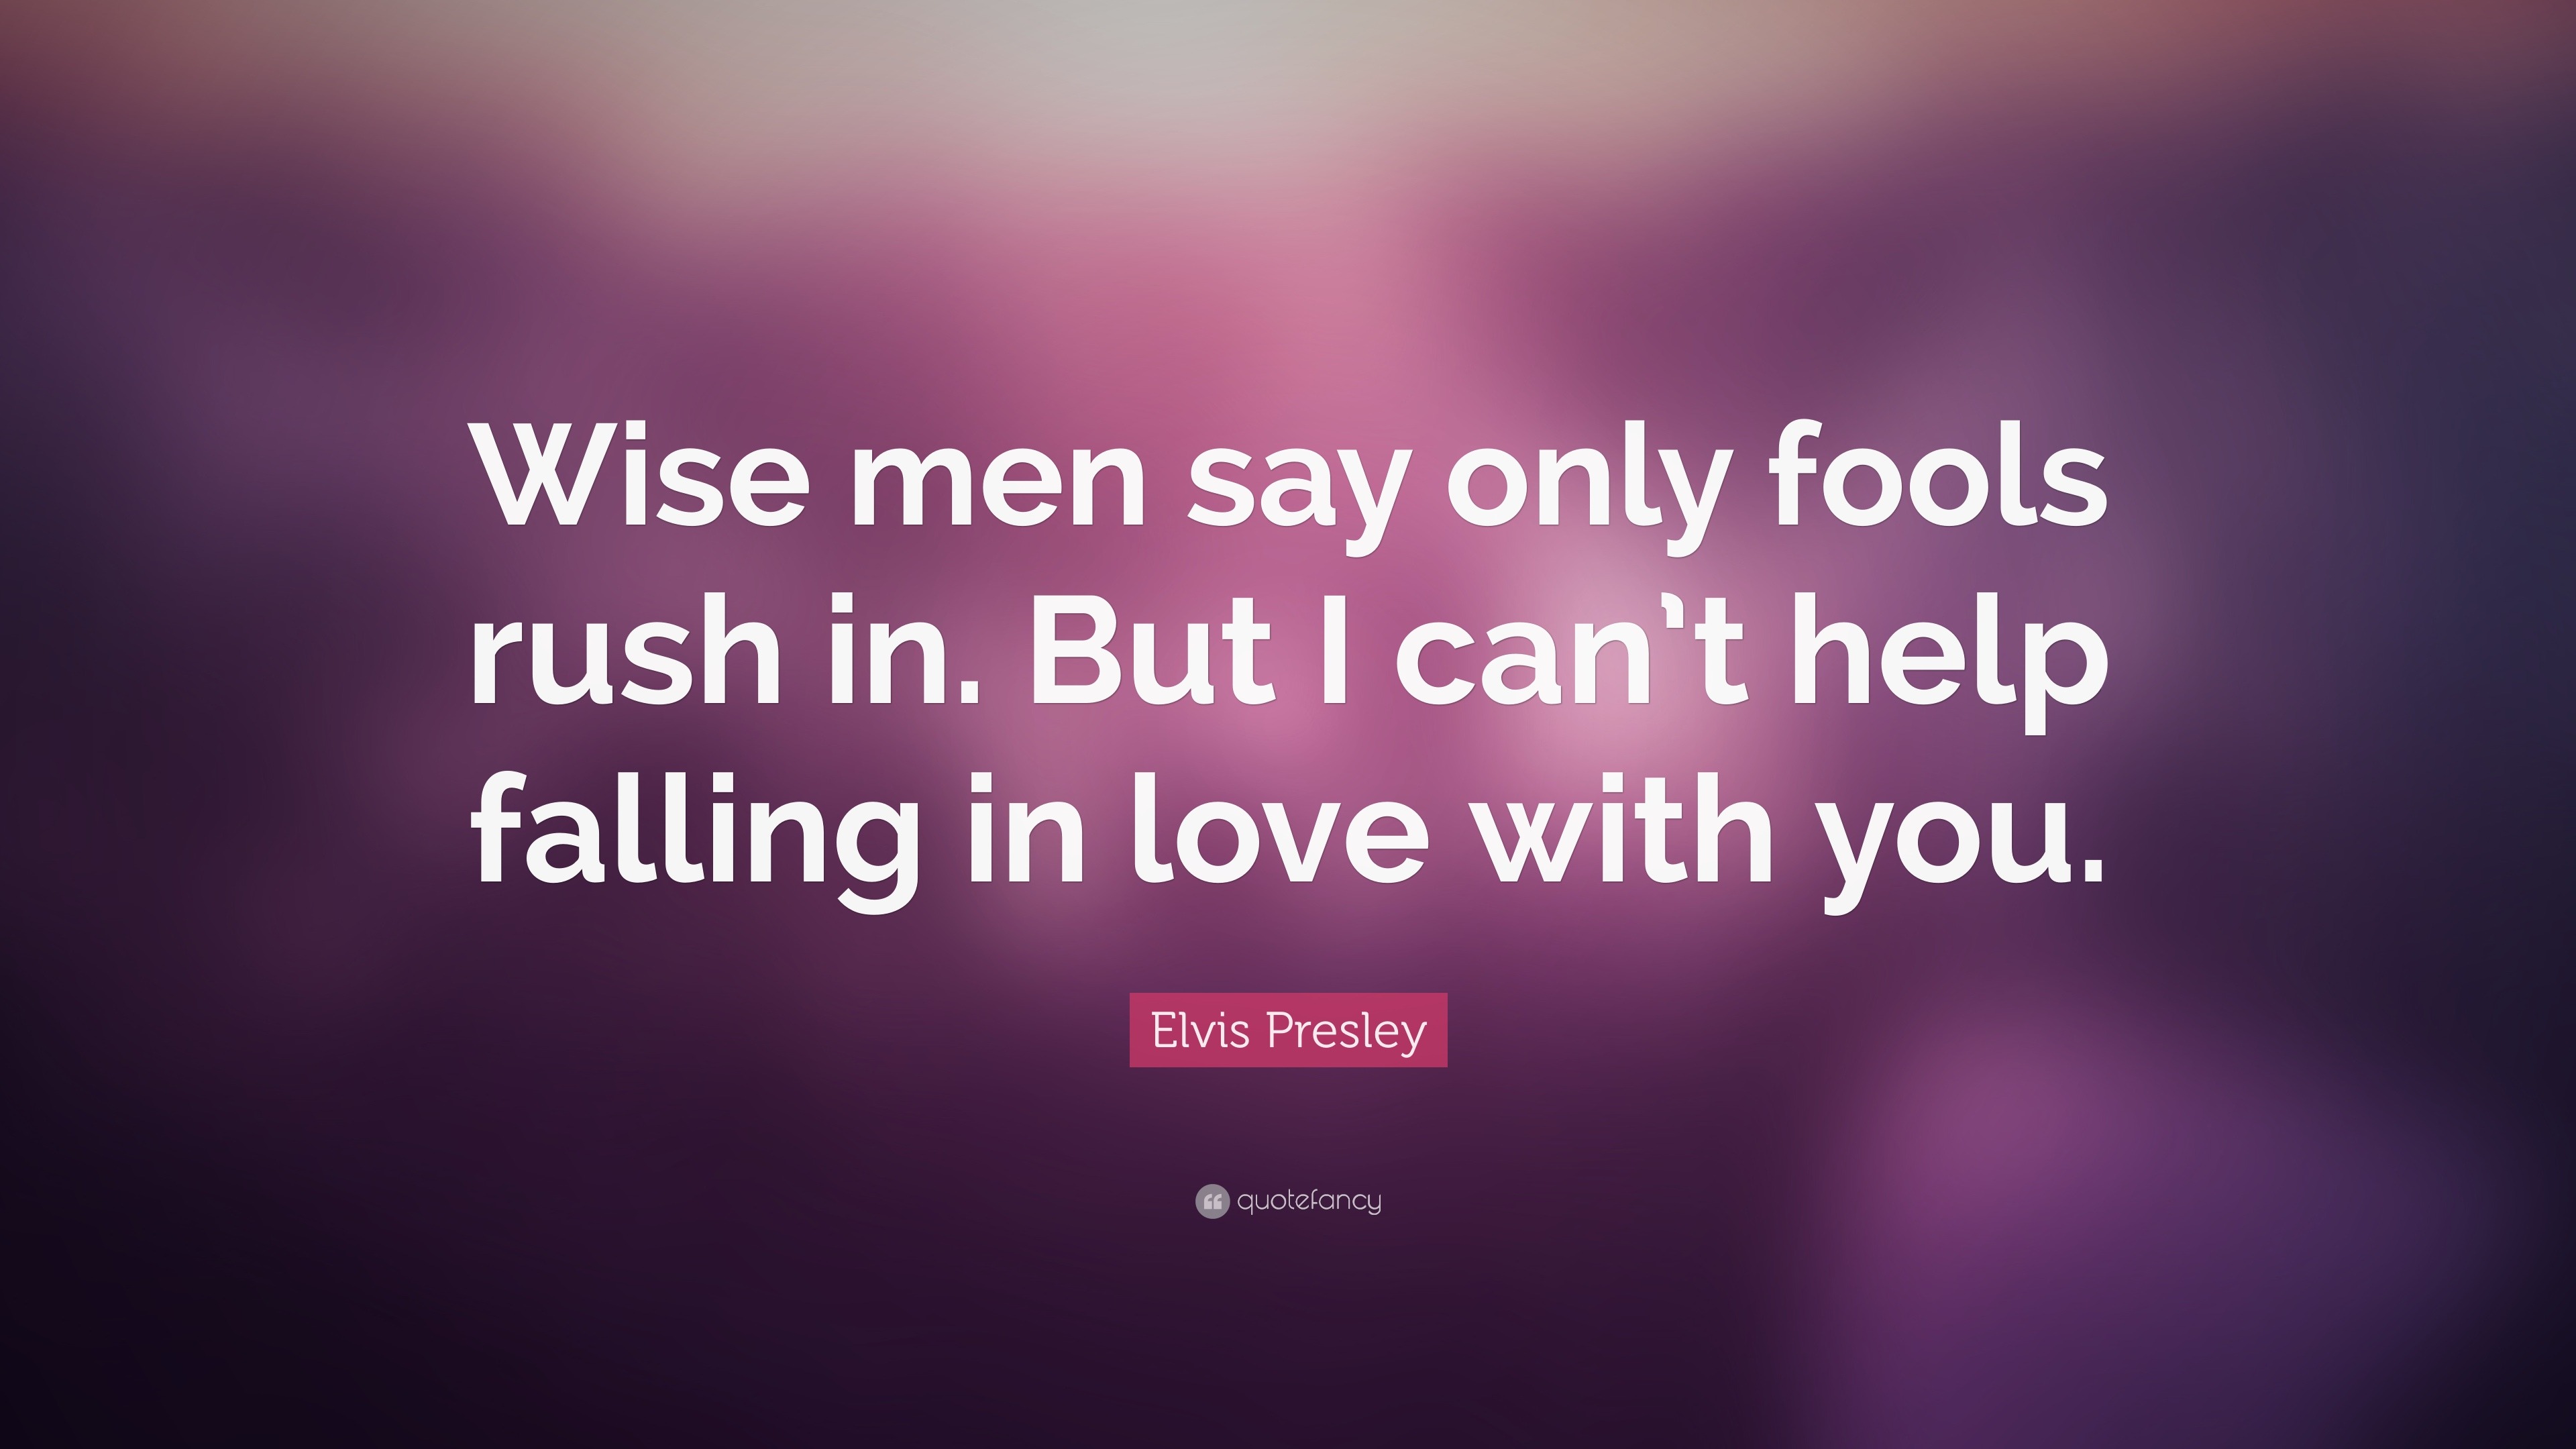 Elvis Presley Quote “Wise men say only fools rush in But I can